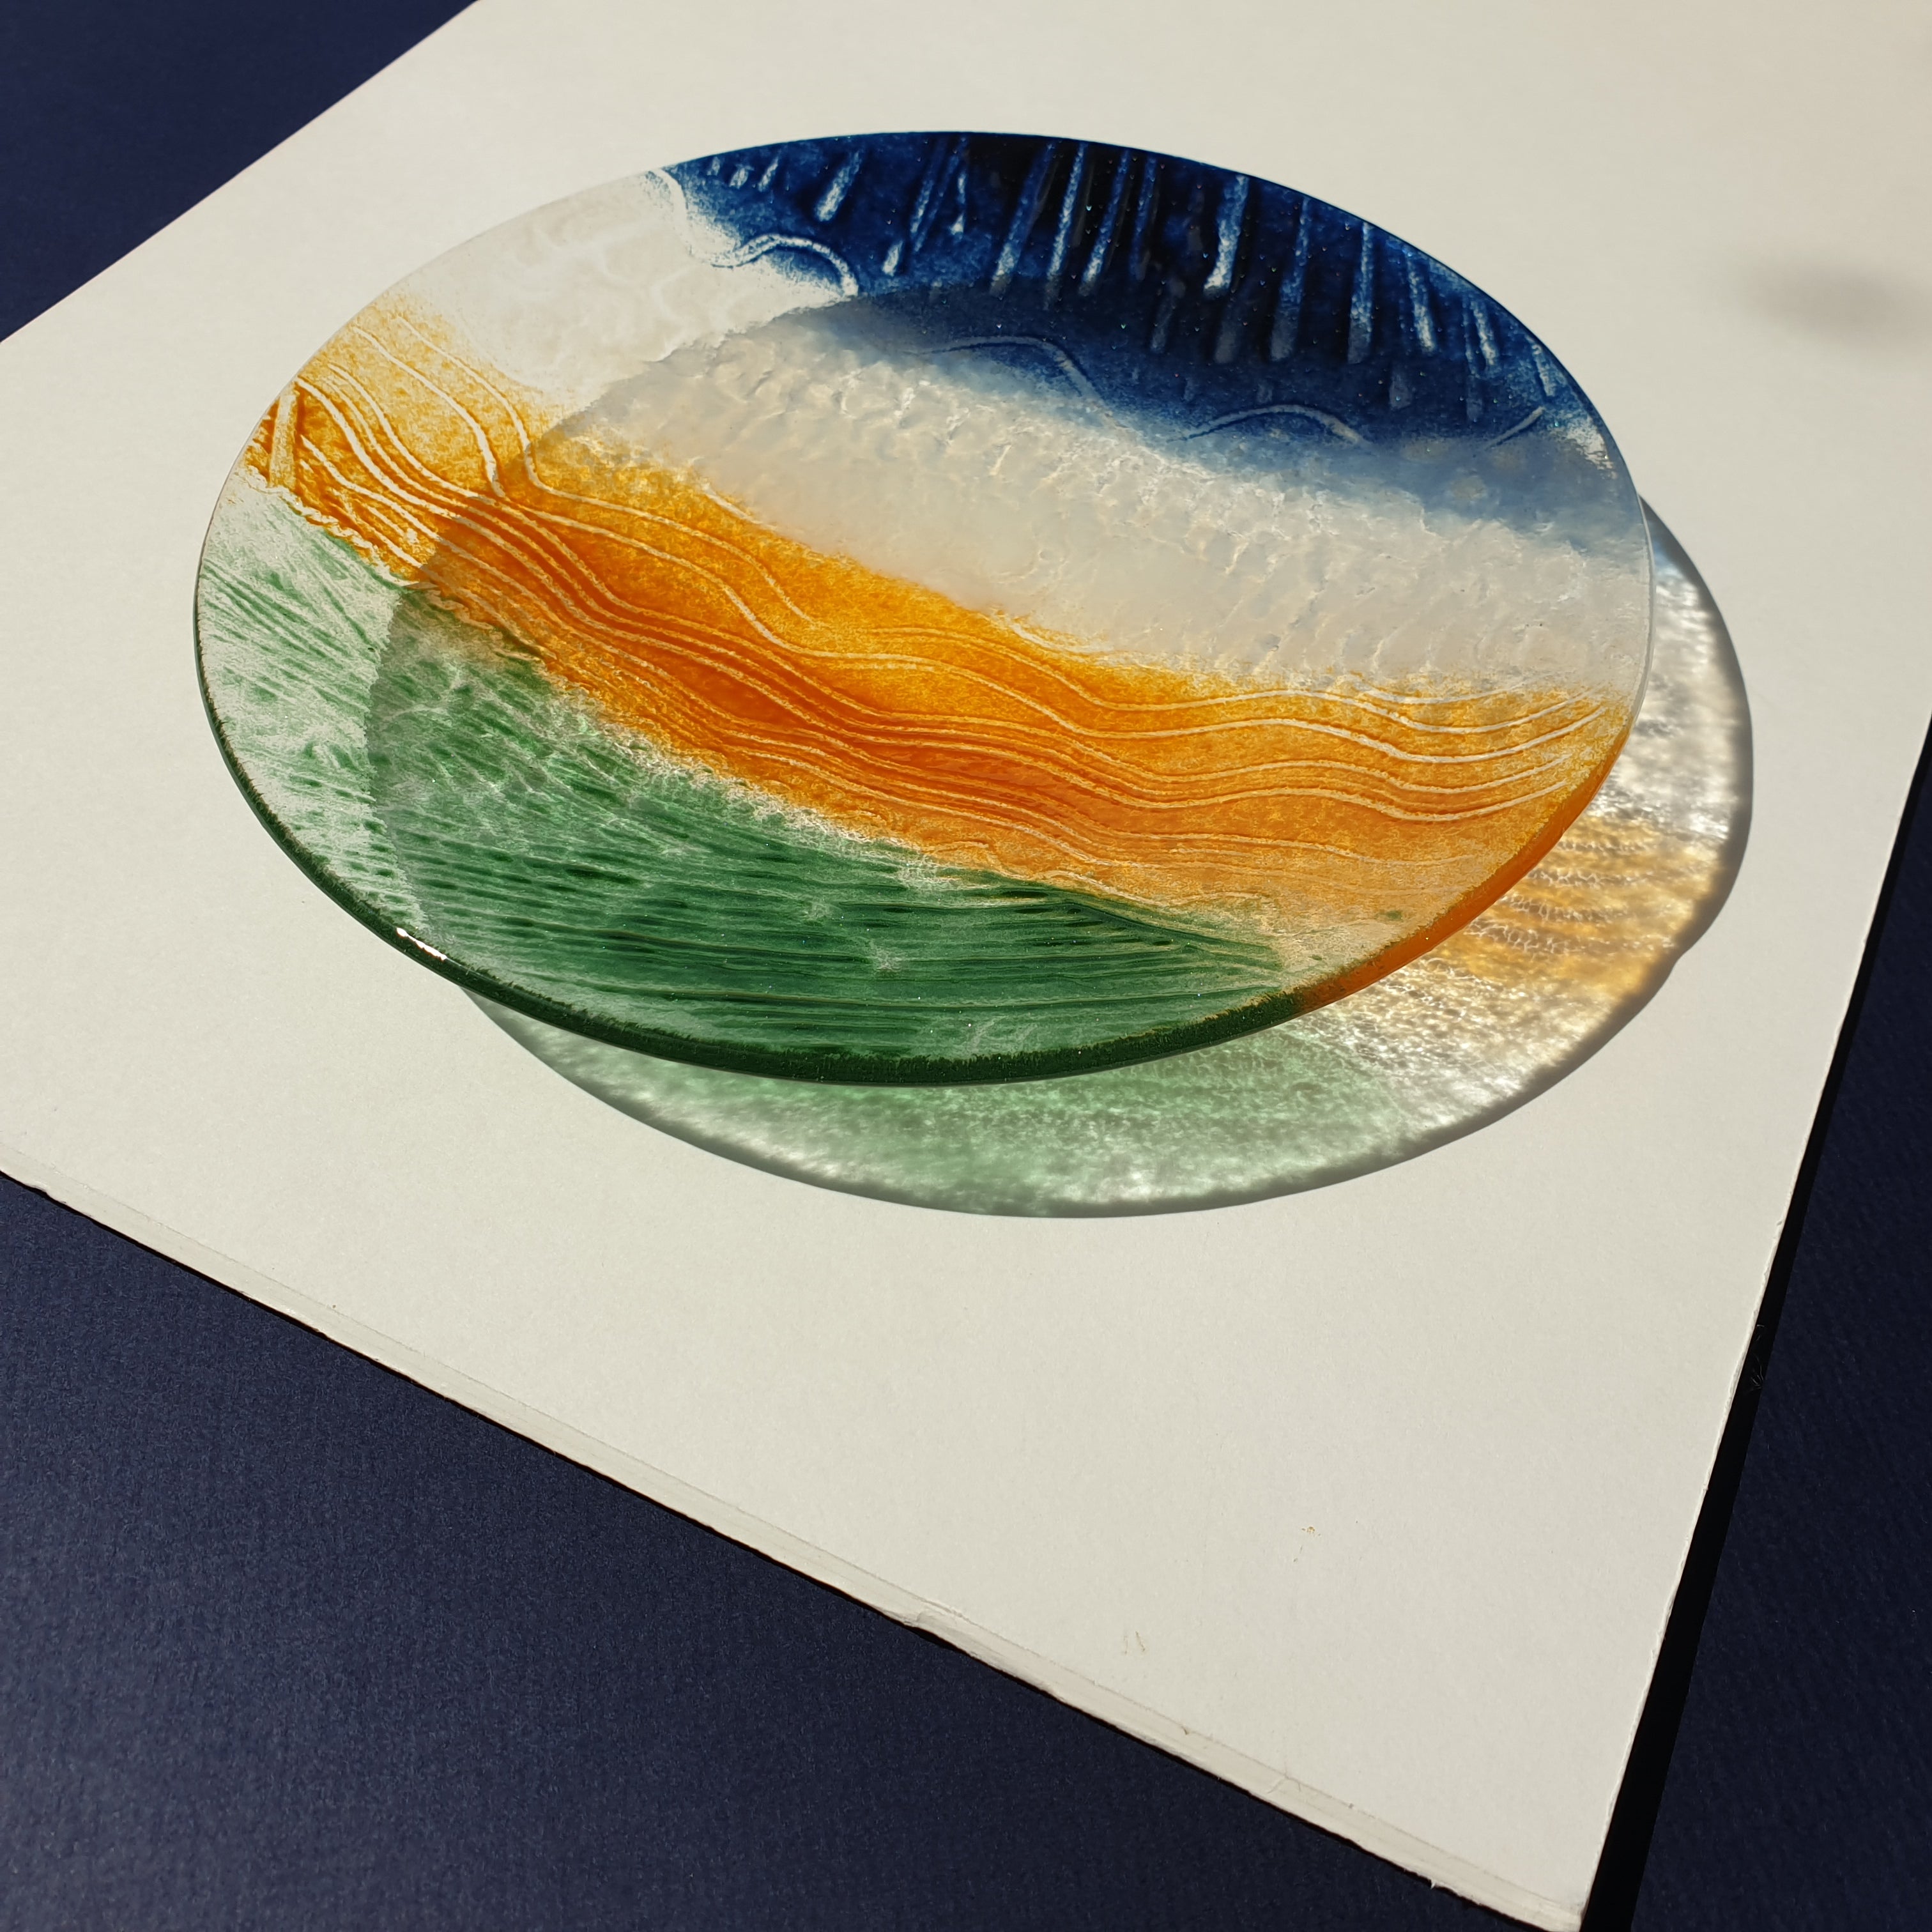 Fused Glass Bowl with Sussex Colours of Blue, White, Green and Brown